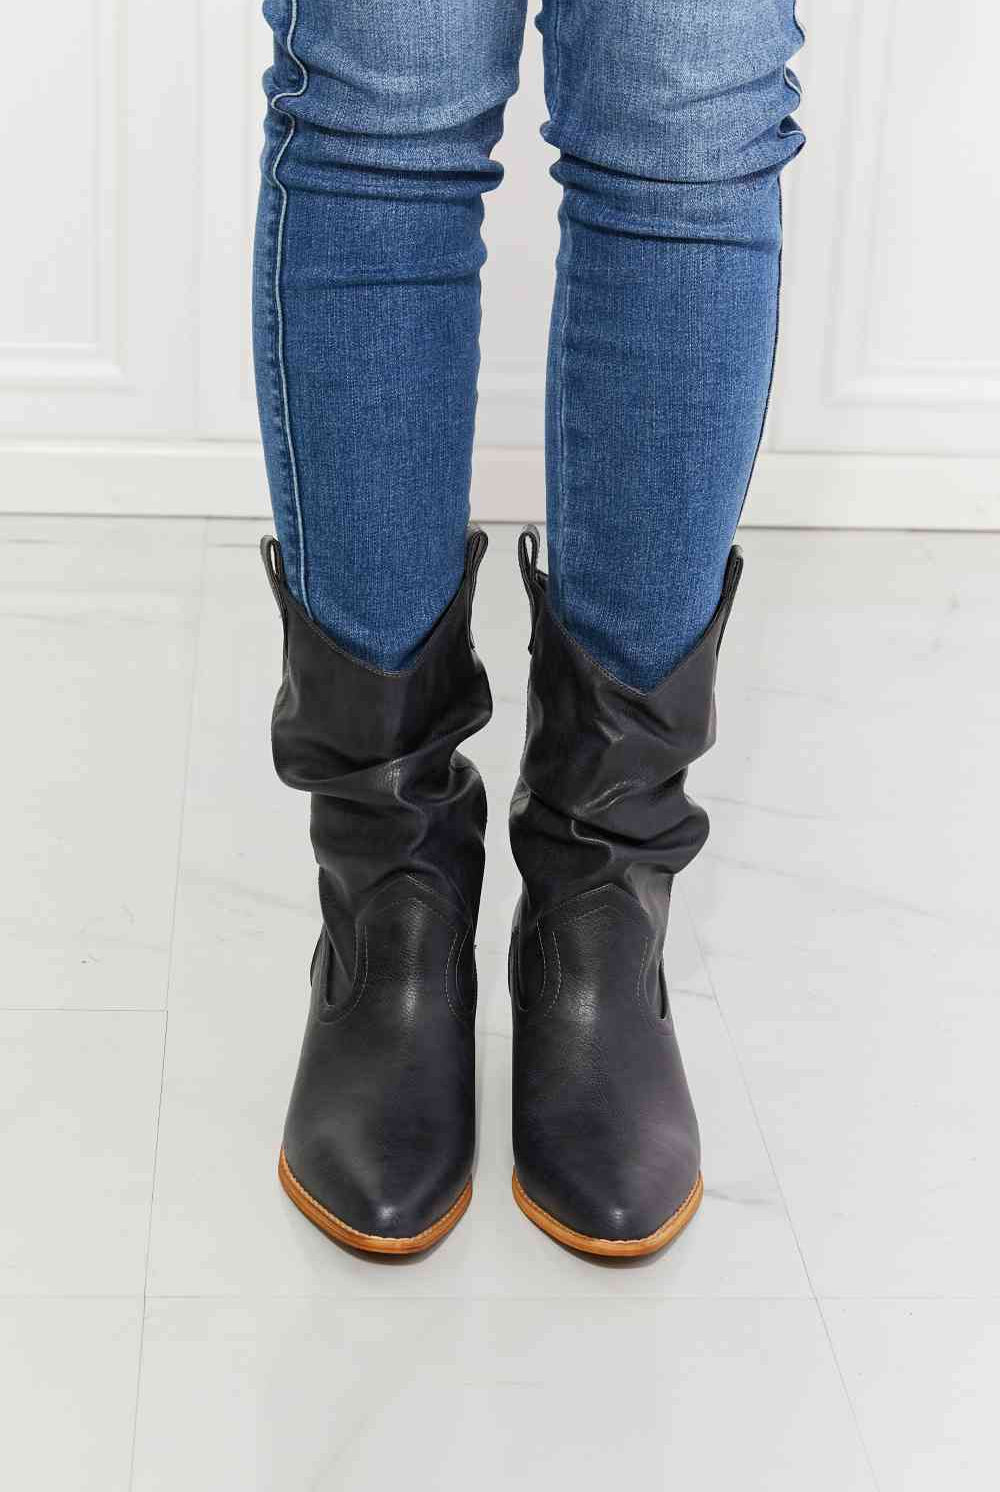 Dark Slate Gray MMShoes Better in Texas Scrunch Cowboy Boots in Navy Shoes